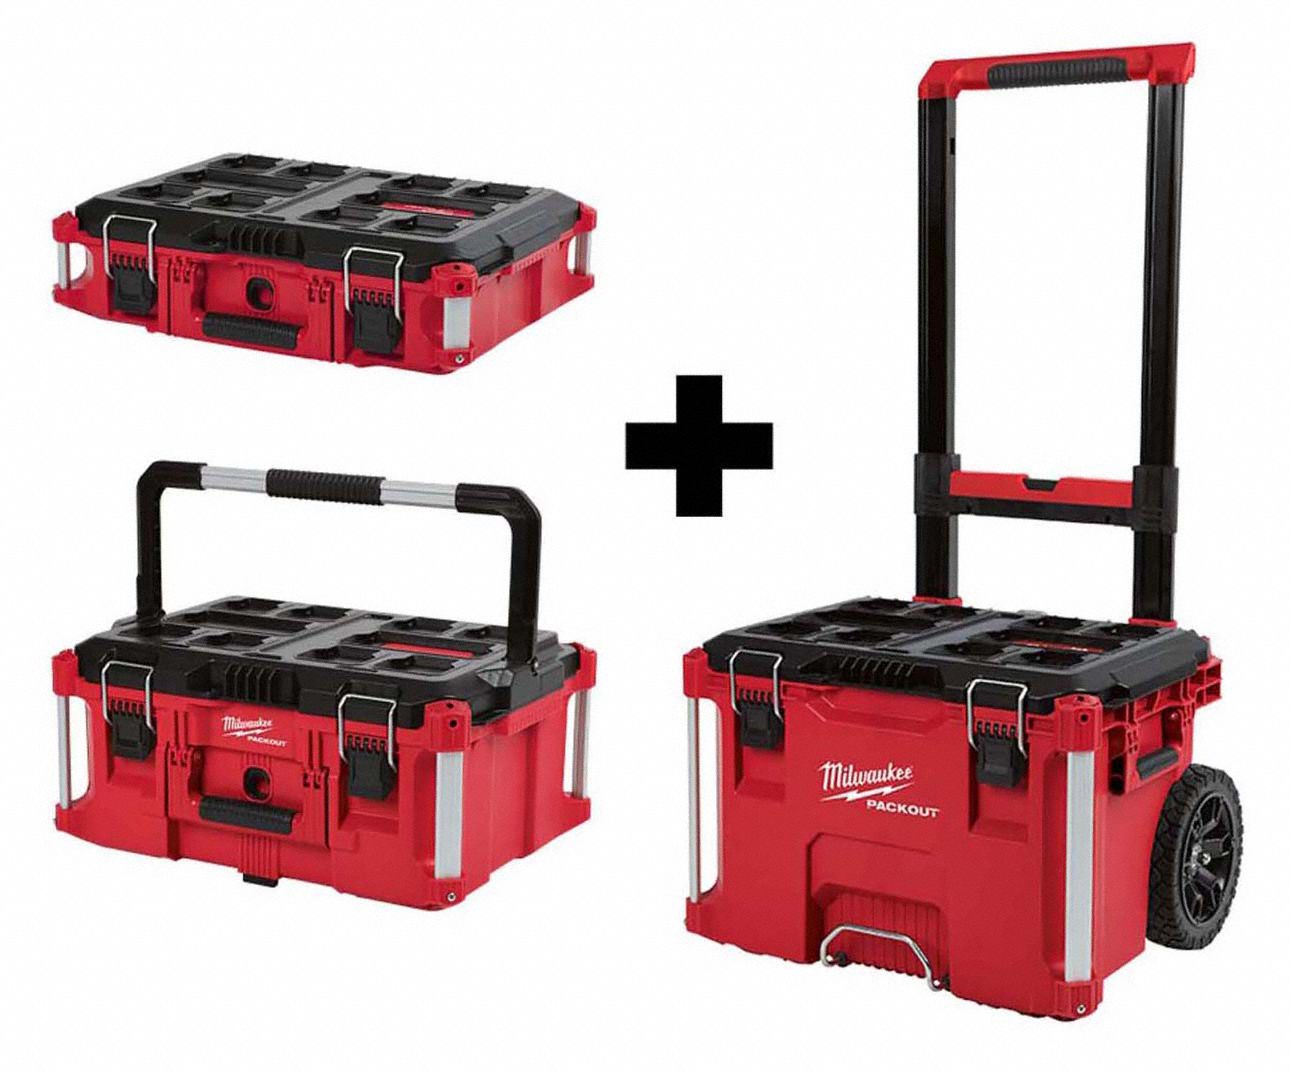 MILWAUKEE PACKOUT Portable Tool Box: 22 1/8 in Wd, 16 1/4 in Dp, 43 1/8 in  Ht, Plastic, Padlockable